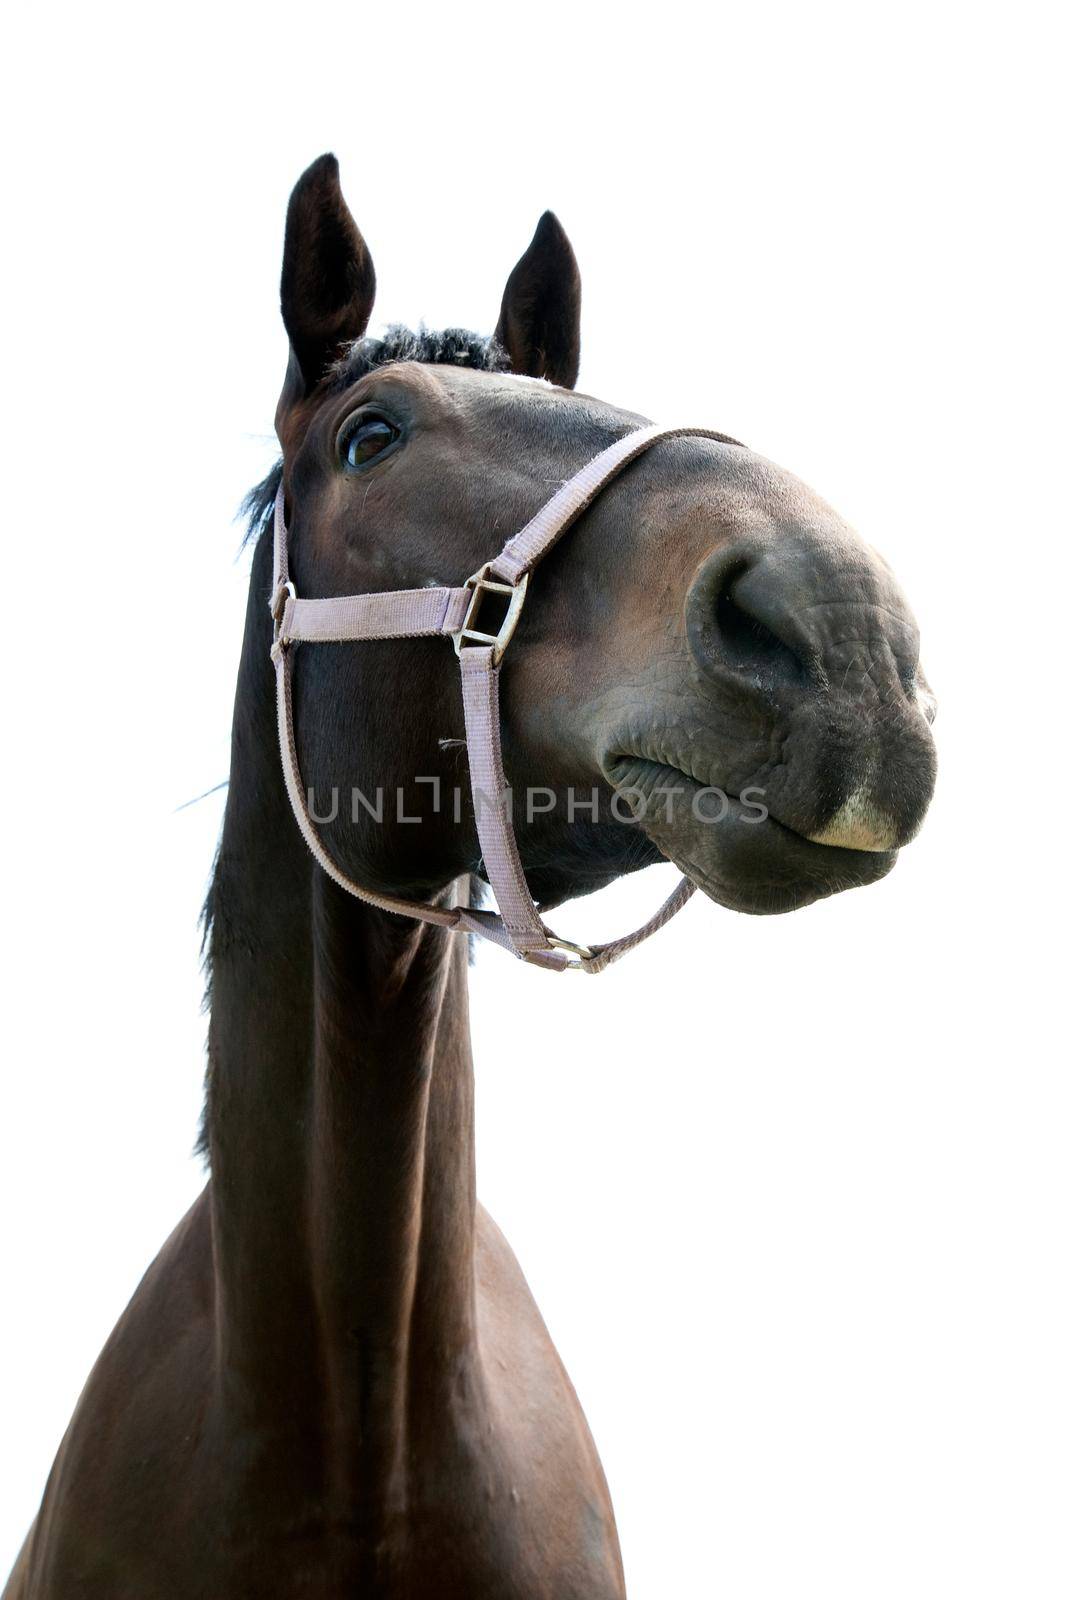 Wide angle, dark brown horse portrait on the white sky background